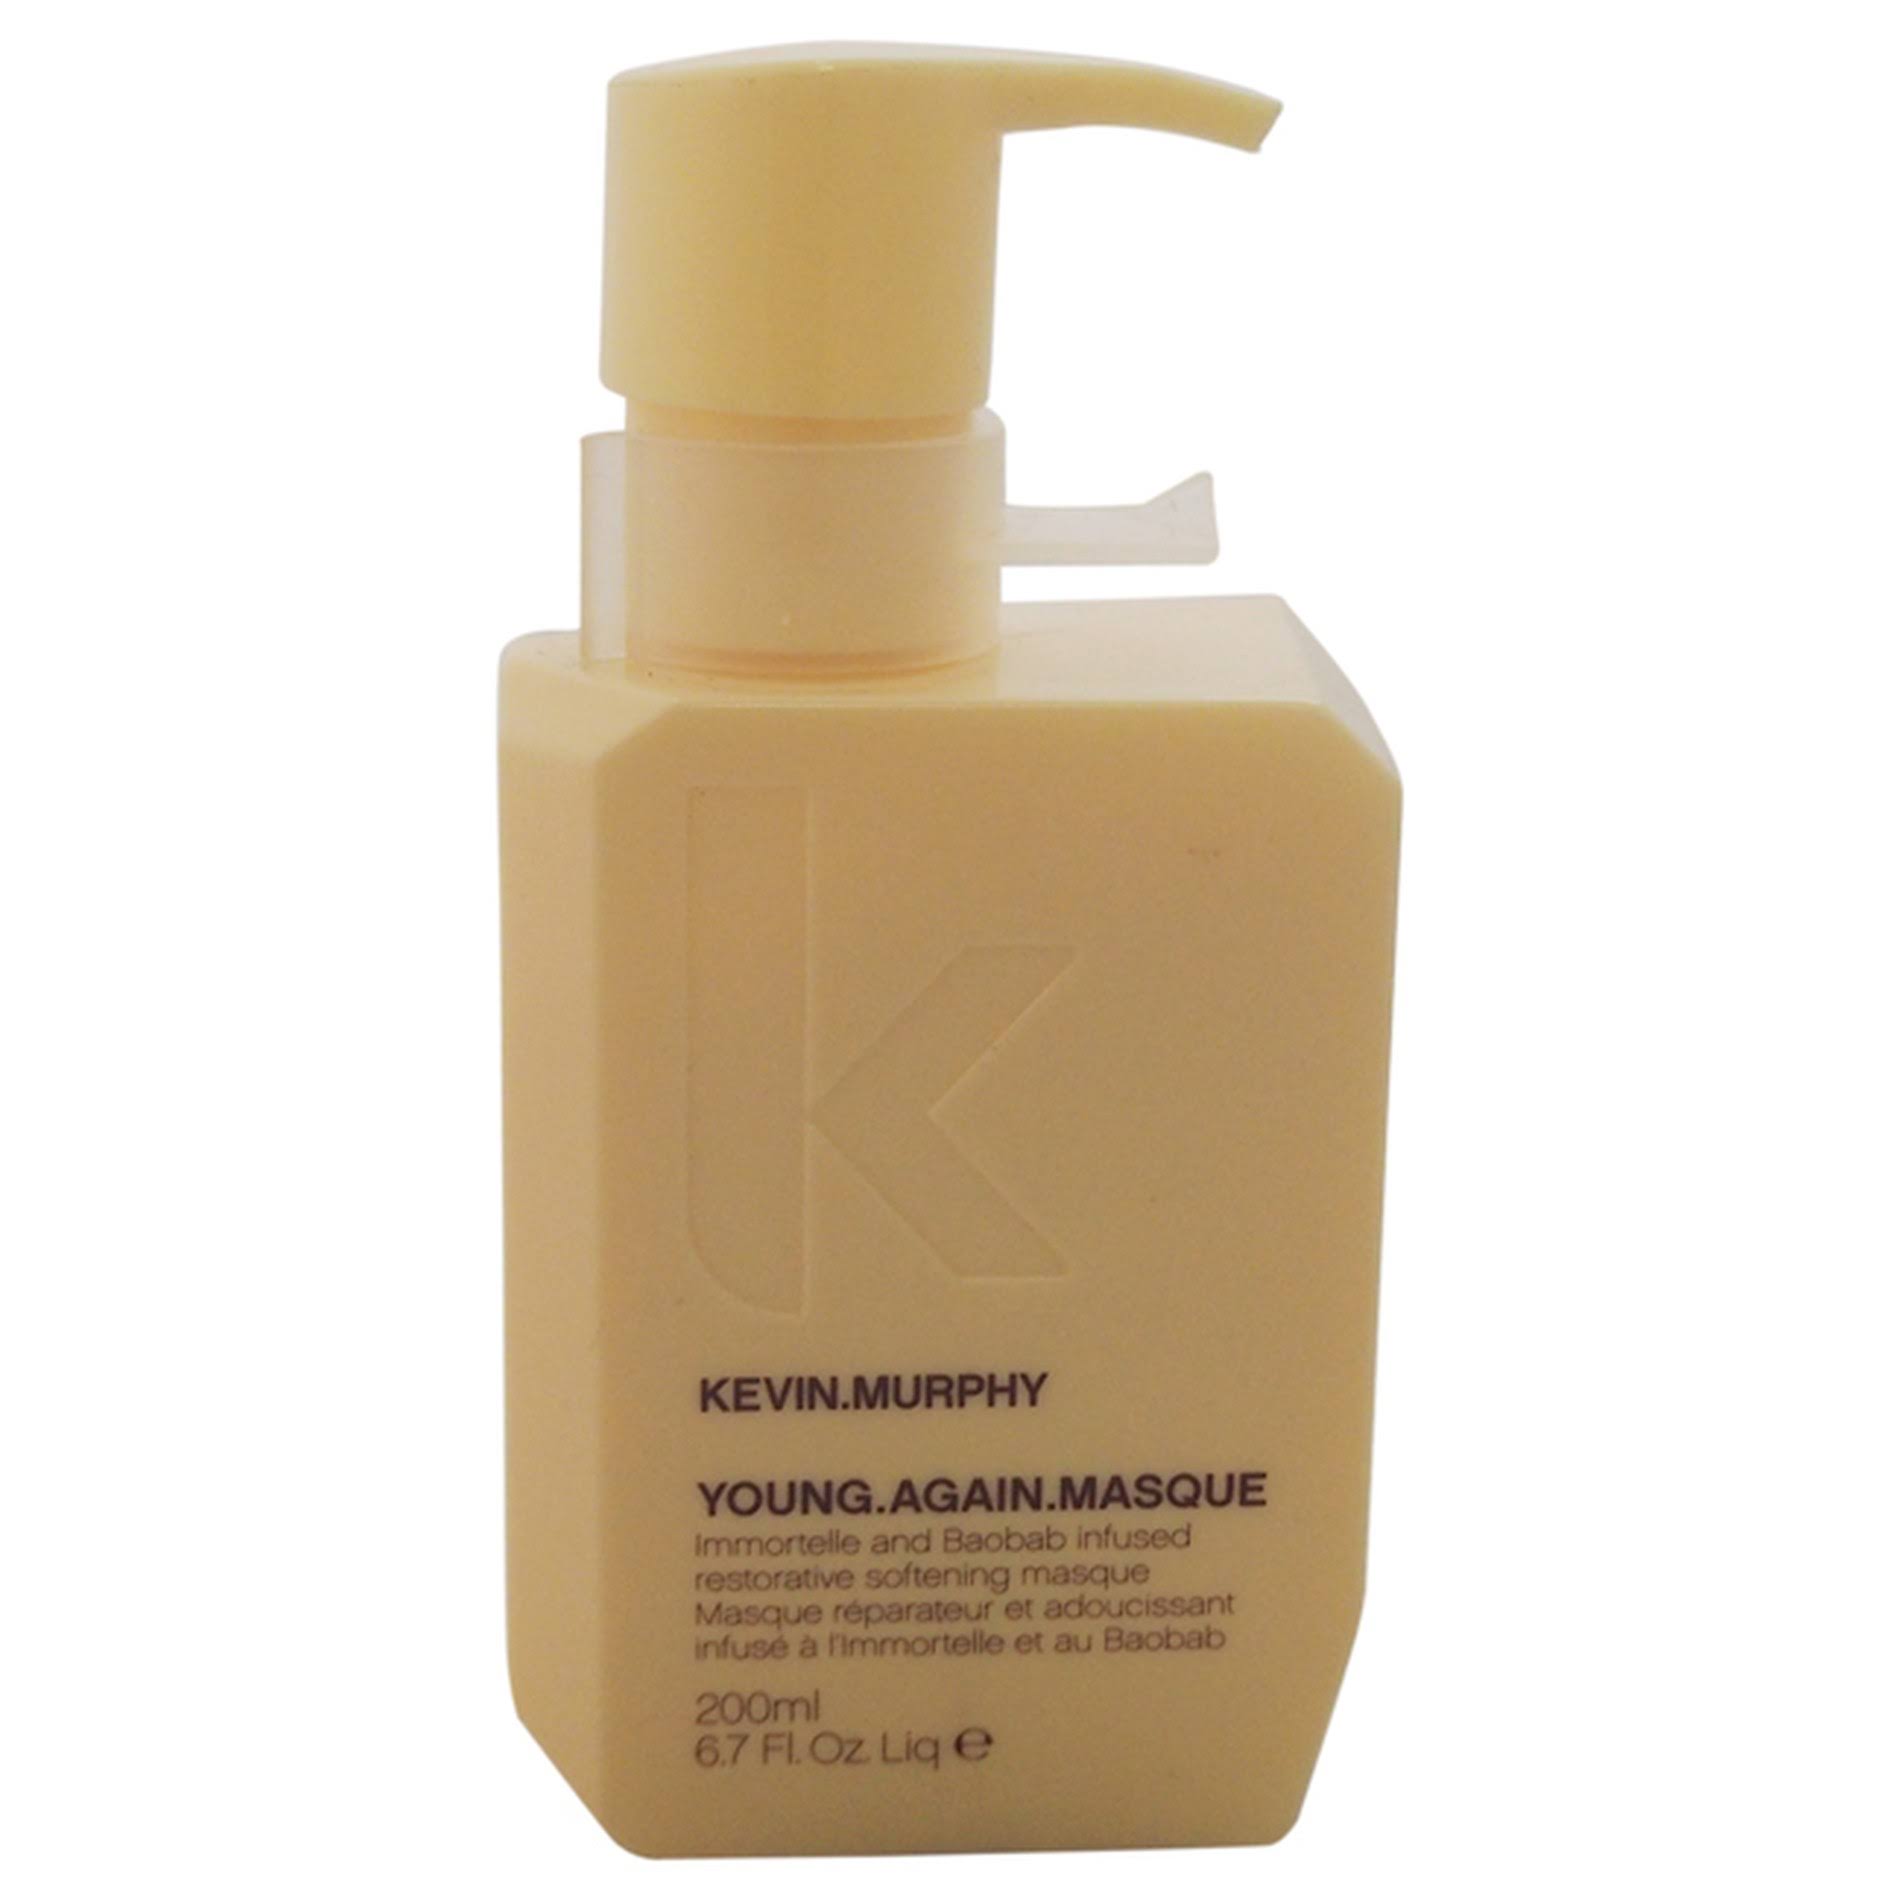 Kevin Murphy Young Again Masque - 200ml